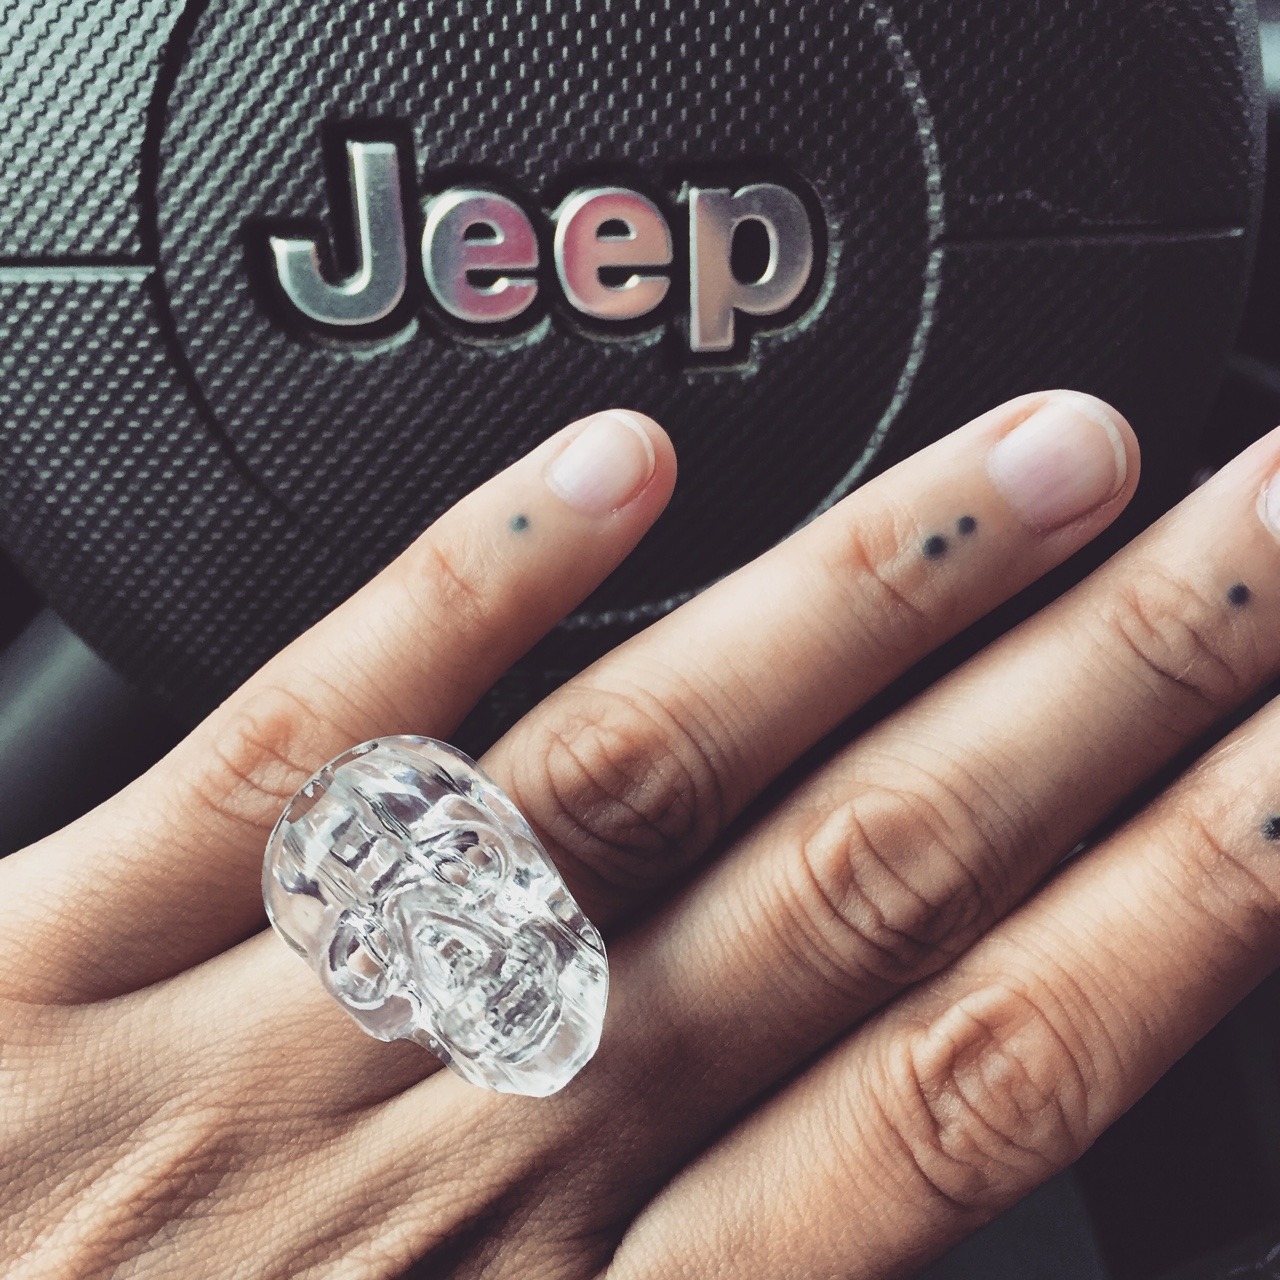 ladywithoutacause:
“ My crystal skull bling bling 💀💎 (it’s a Halloween ring 😂)
”